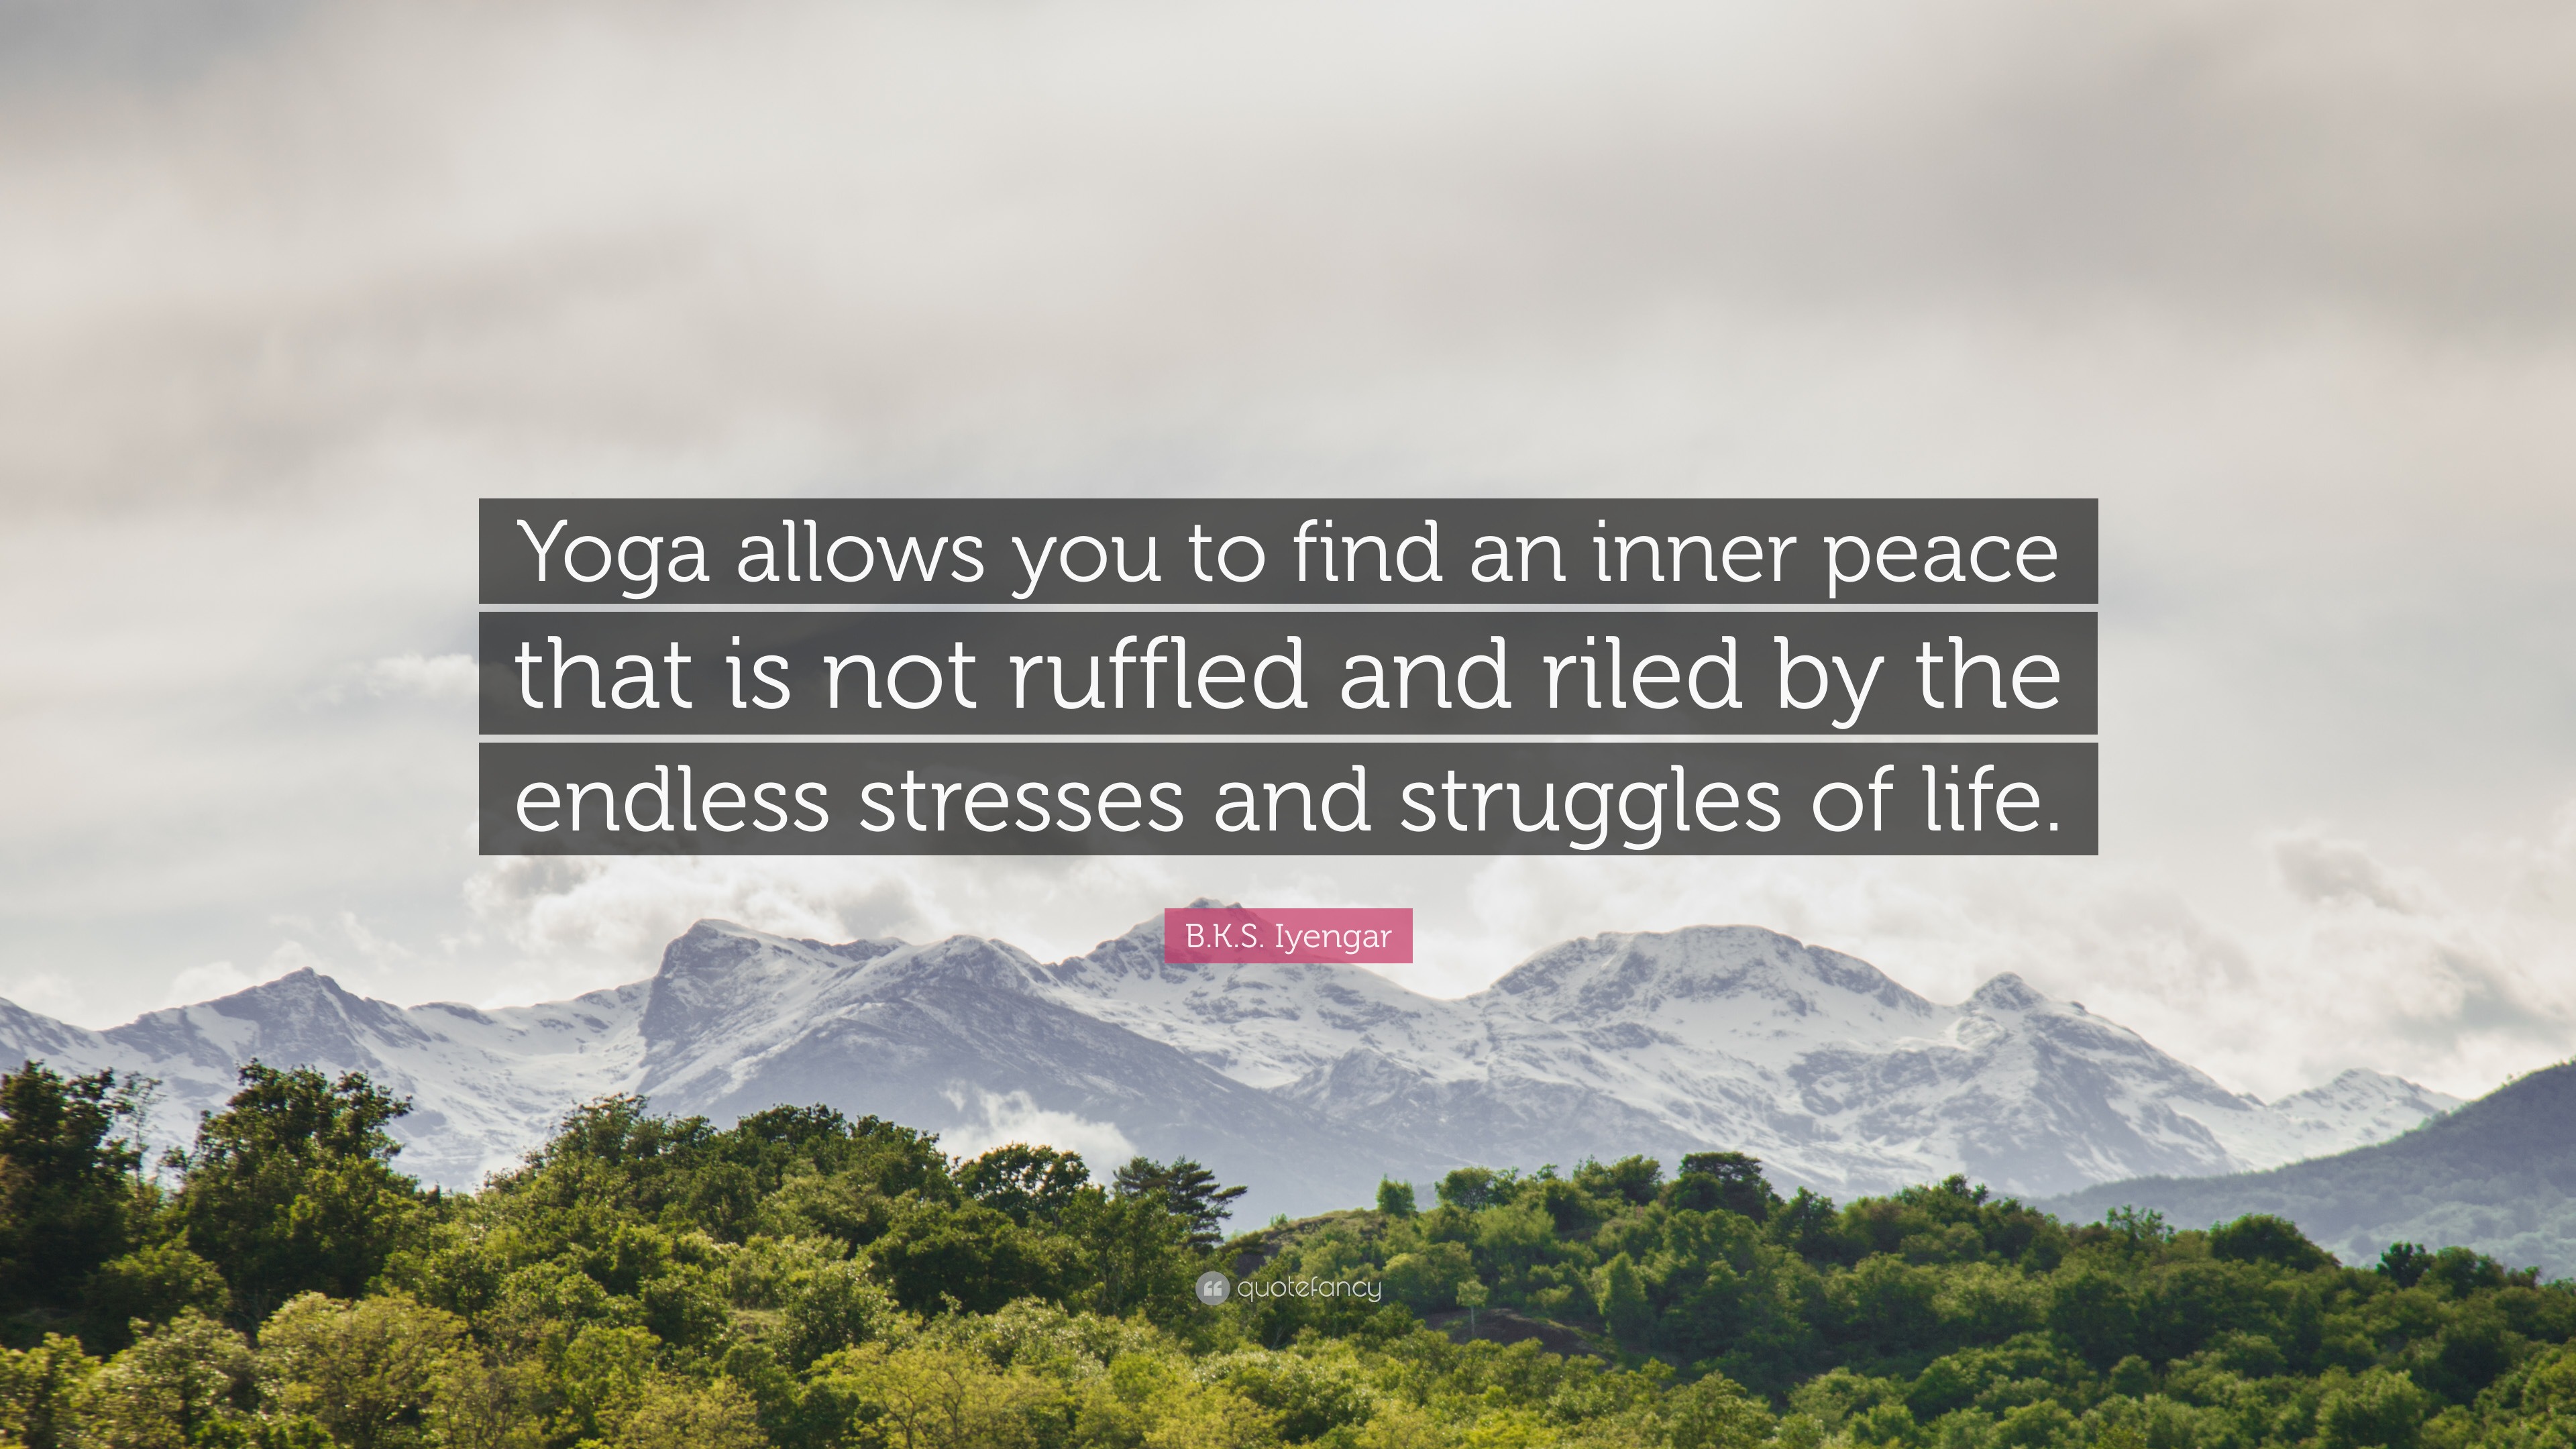 Yoga girls. Who are you finding inner peace with? : r/TrueFMK